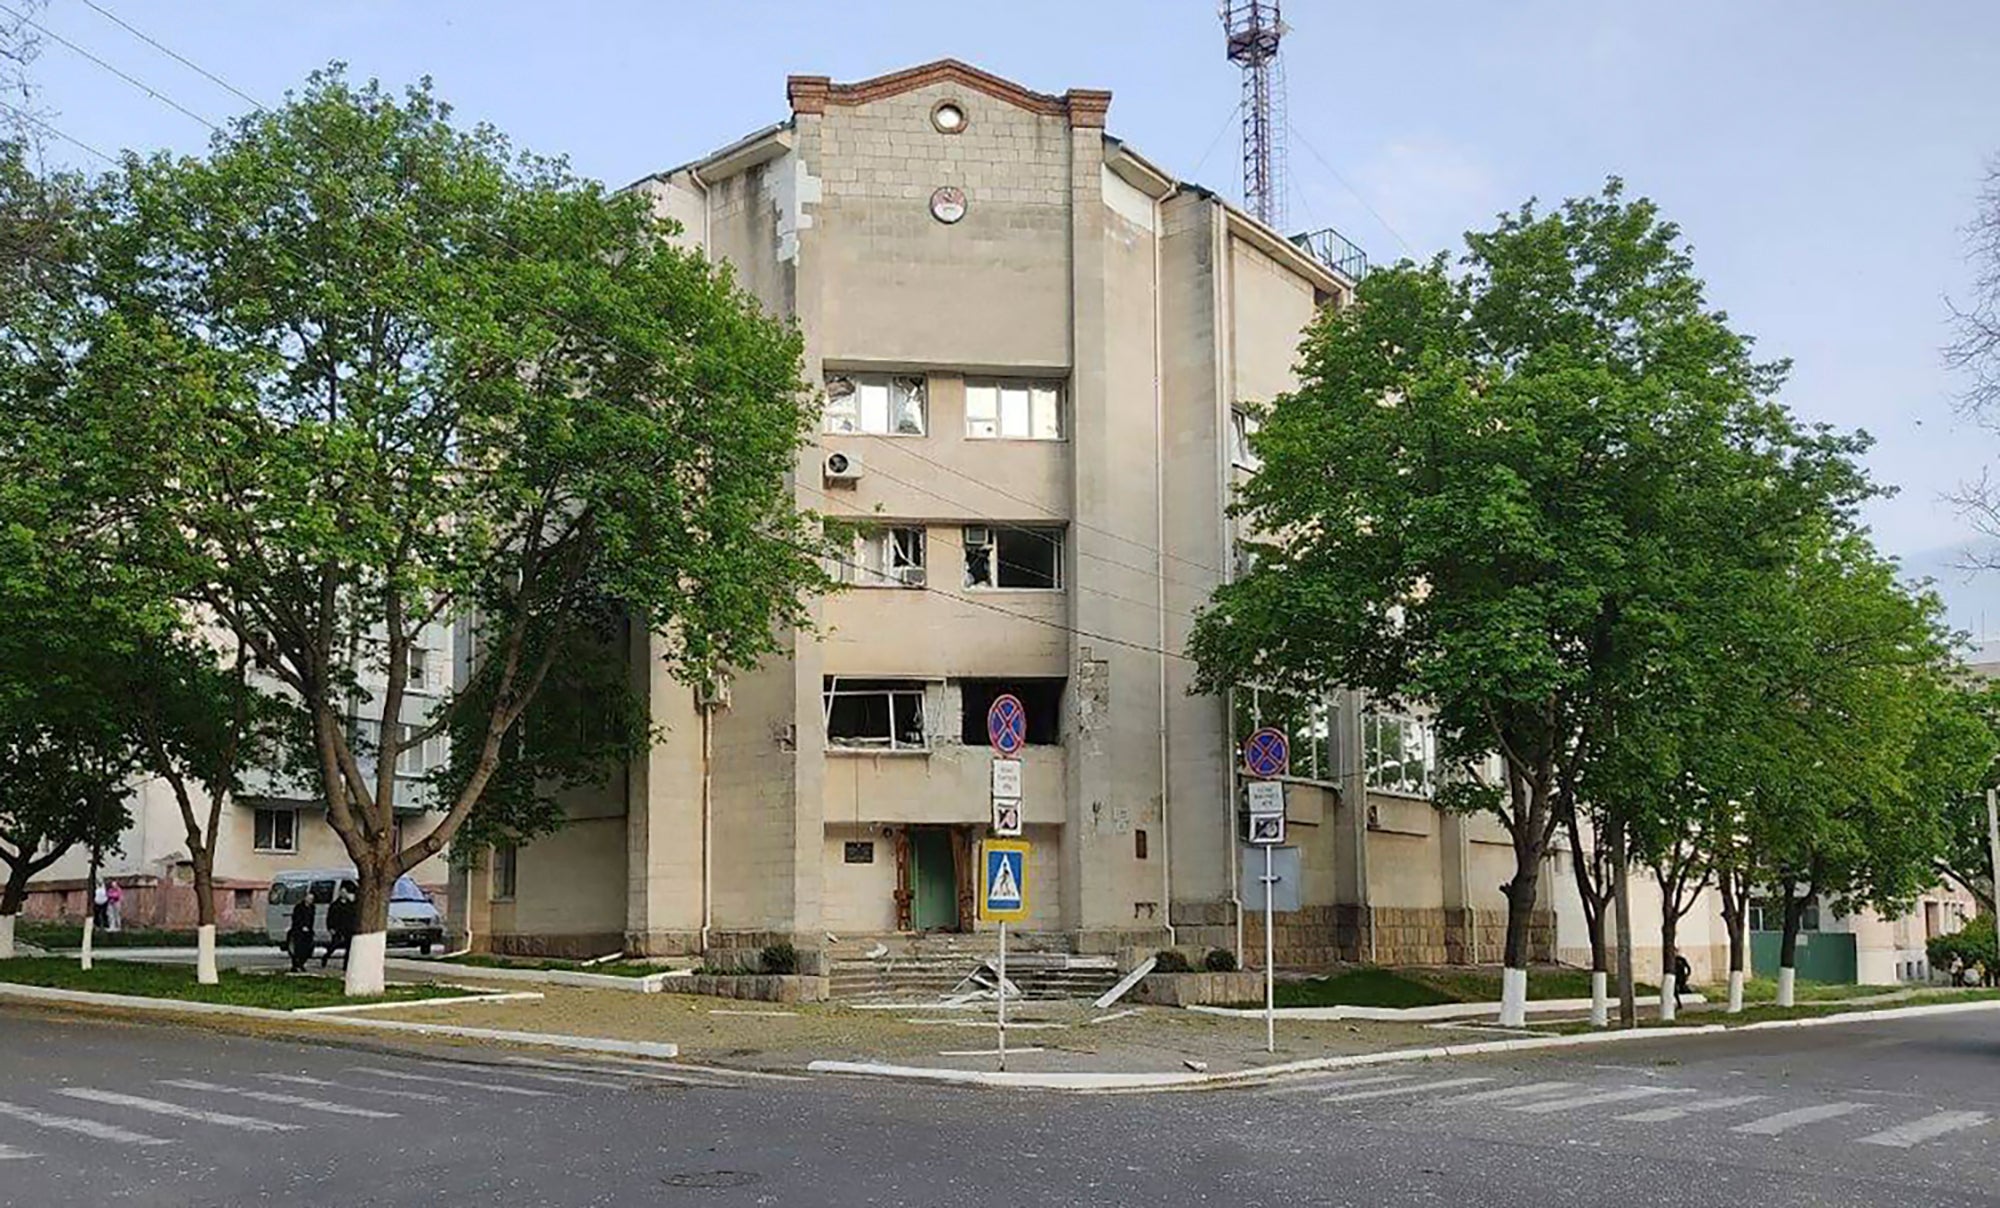 The damaged building of the Ministry of State Security, in Tiraspol. Russia blames Ukrainian saboteurs; Ukrainians call it a false flag operation by Russia